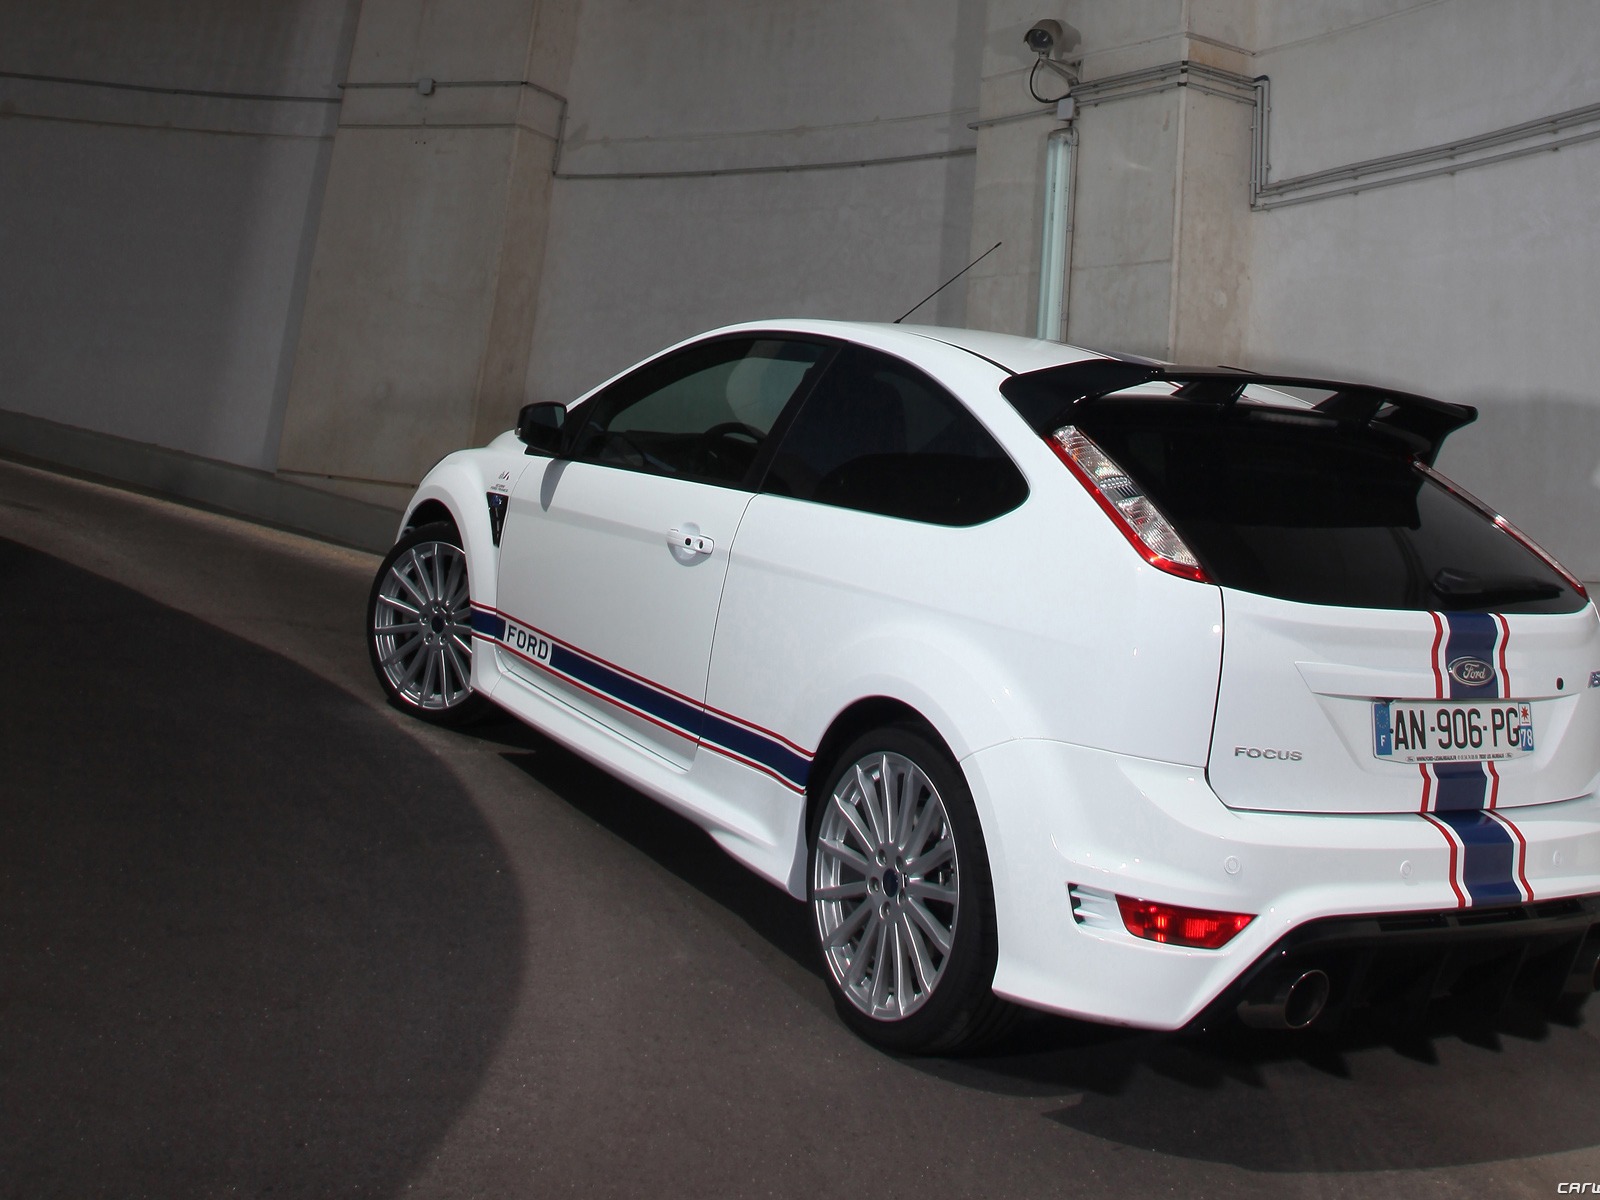 Ford Focus RS Le Mans Classic - 2010 福特8 - 1600x1200